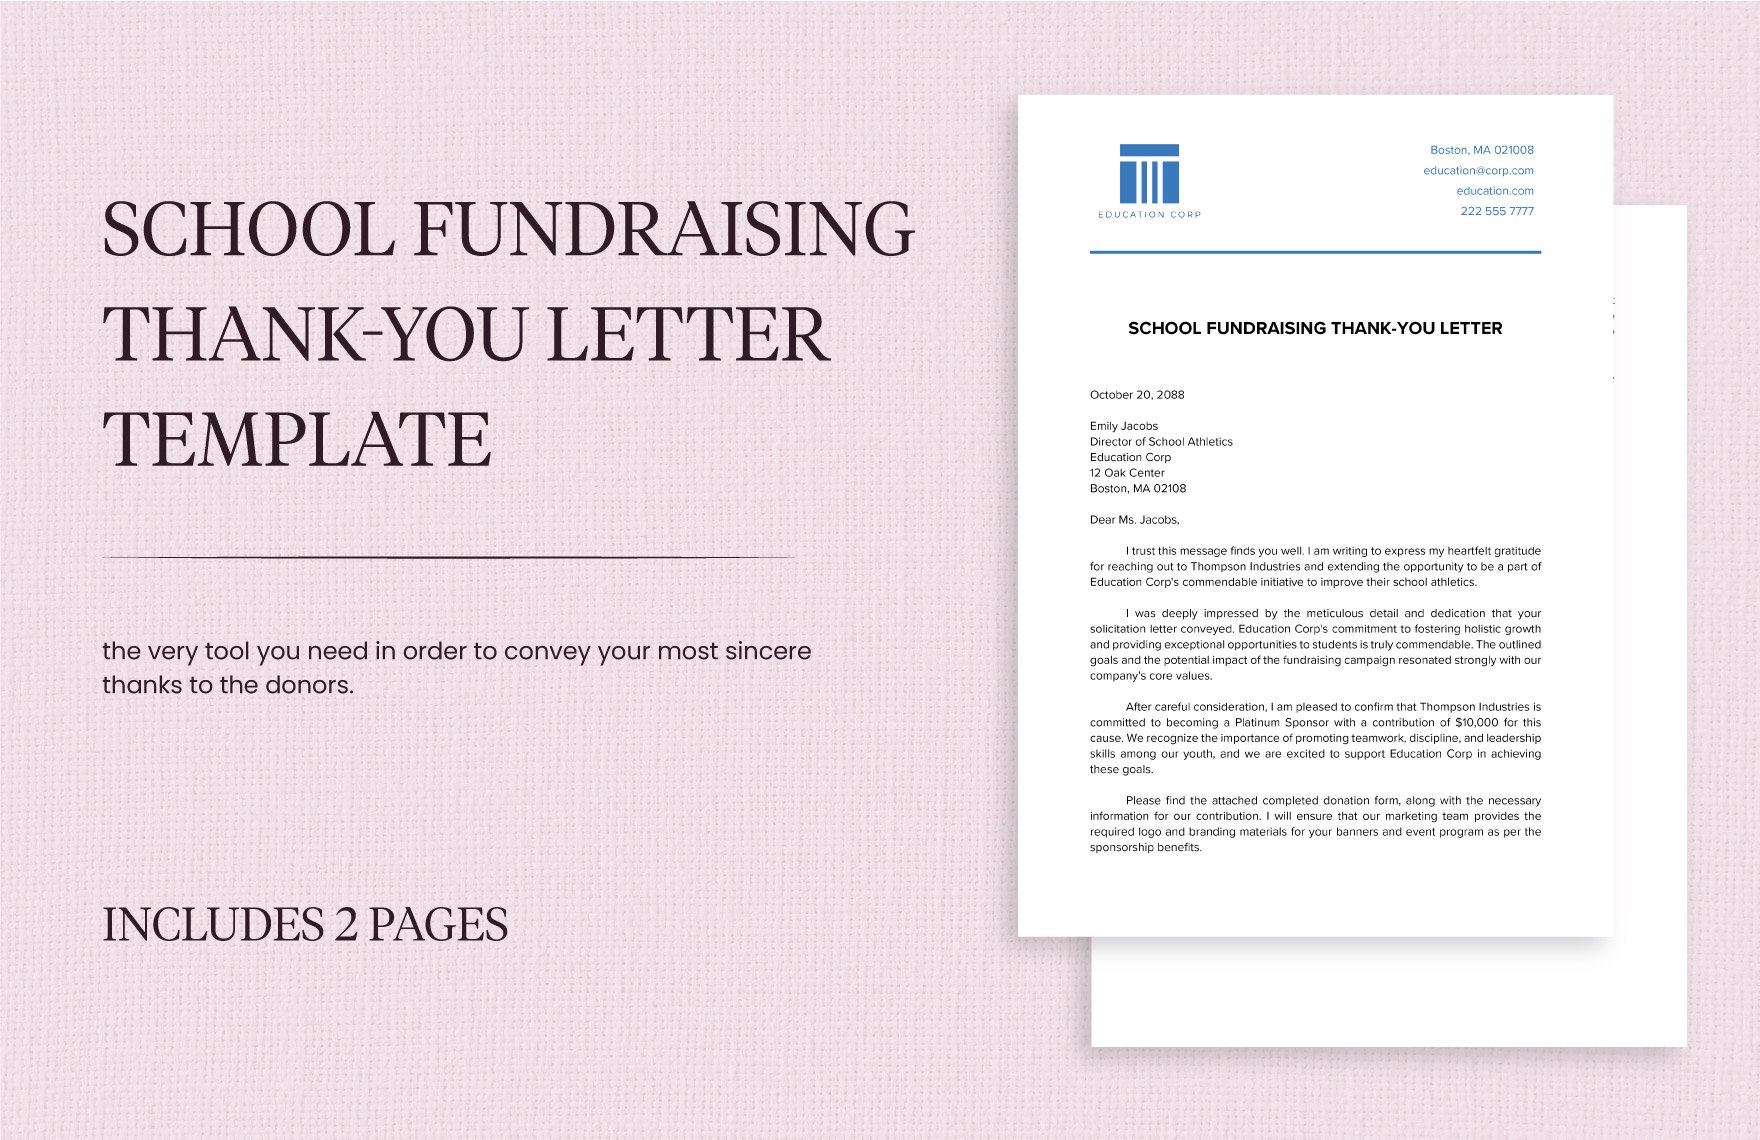 School Fundraising Thank-You Letter Template